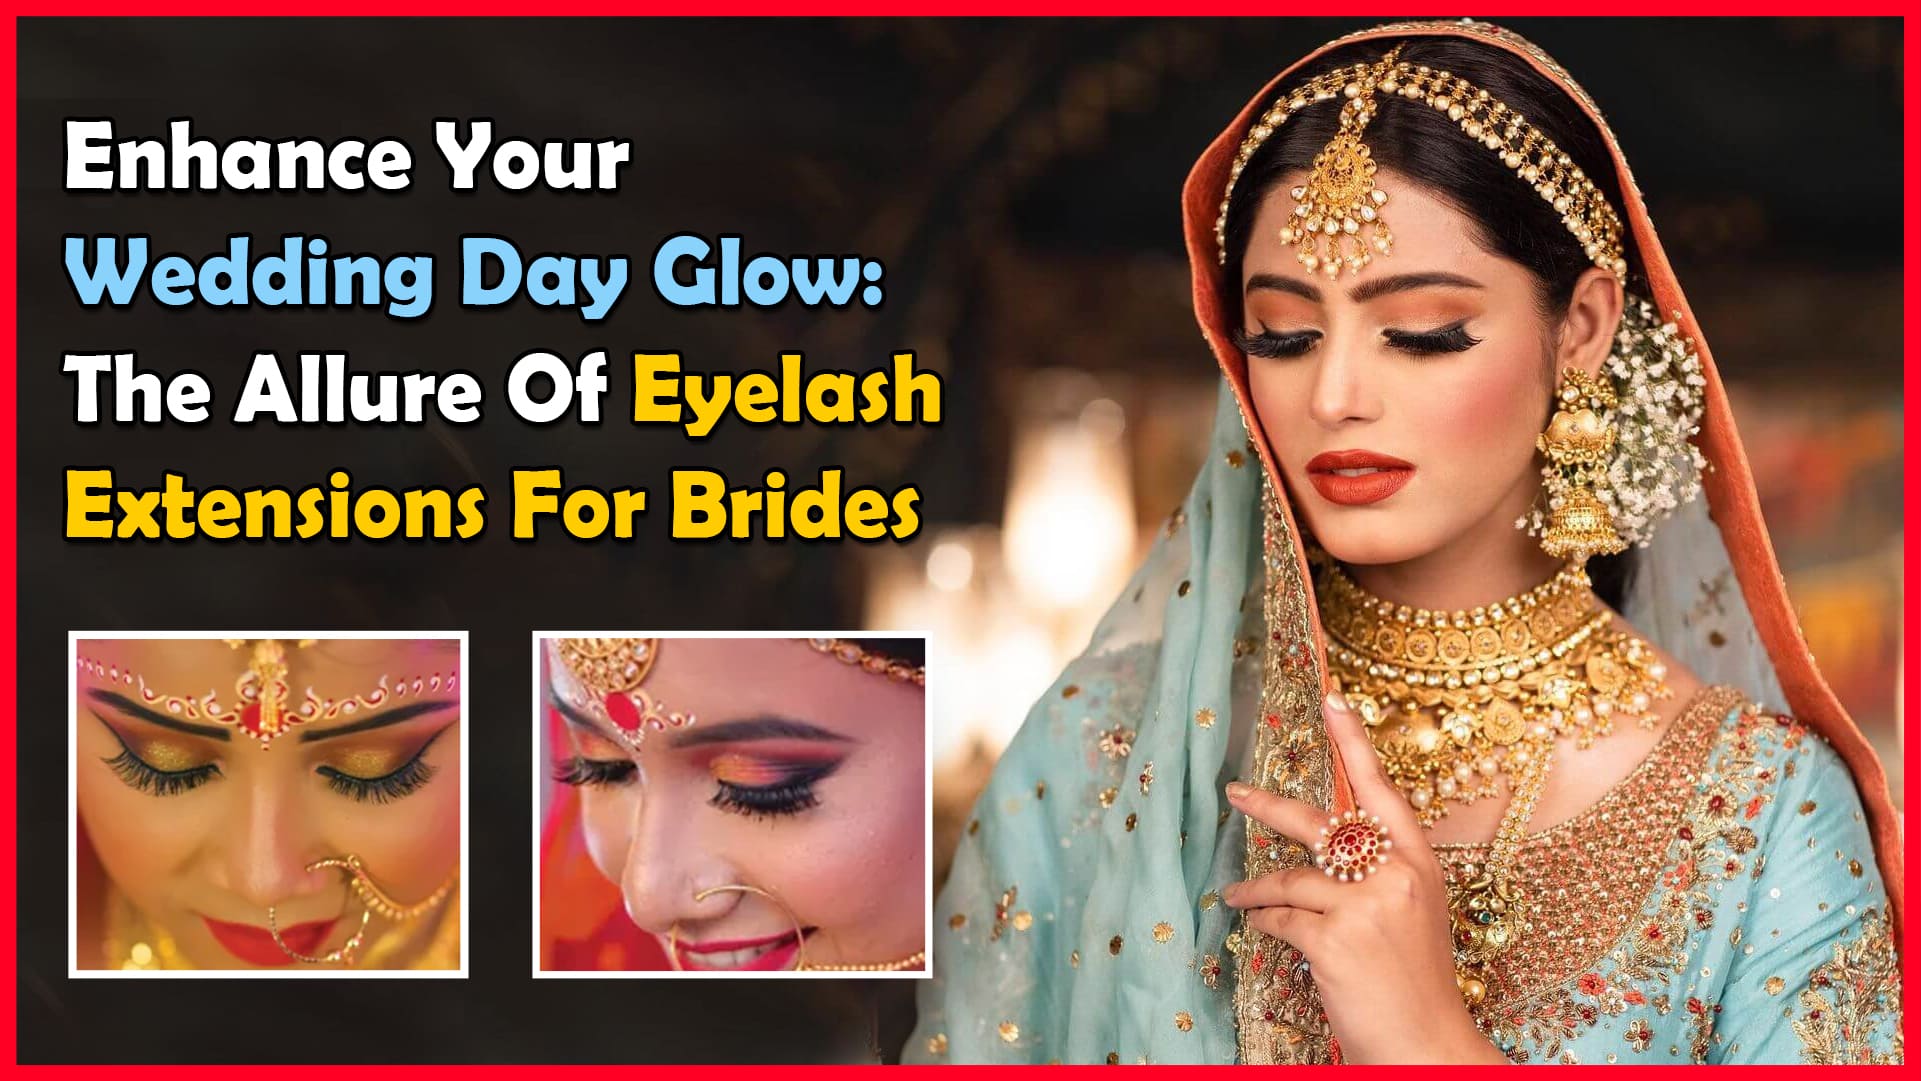 The allure of eyelash extensions for brides